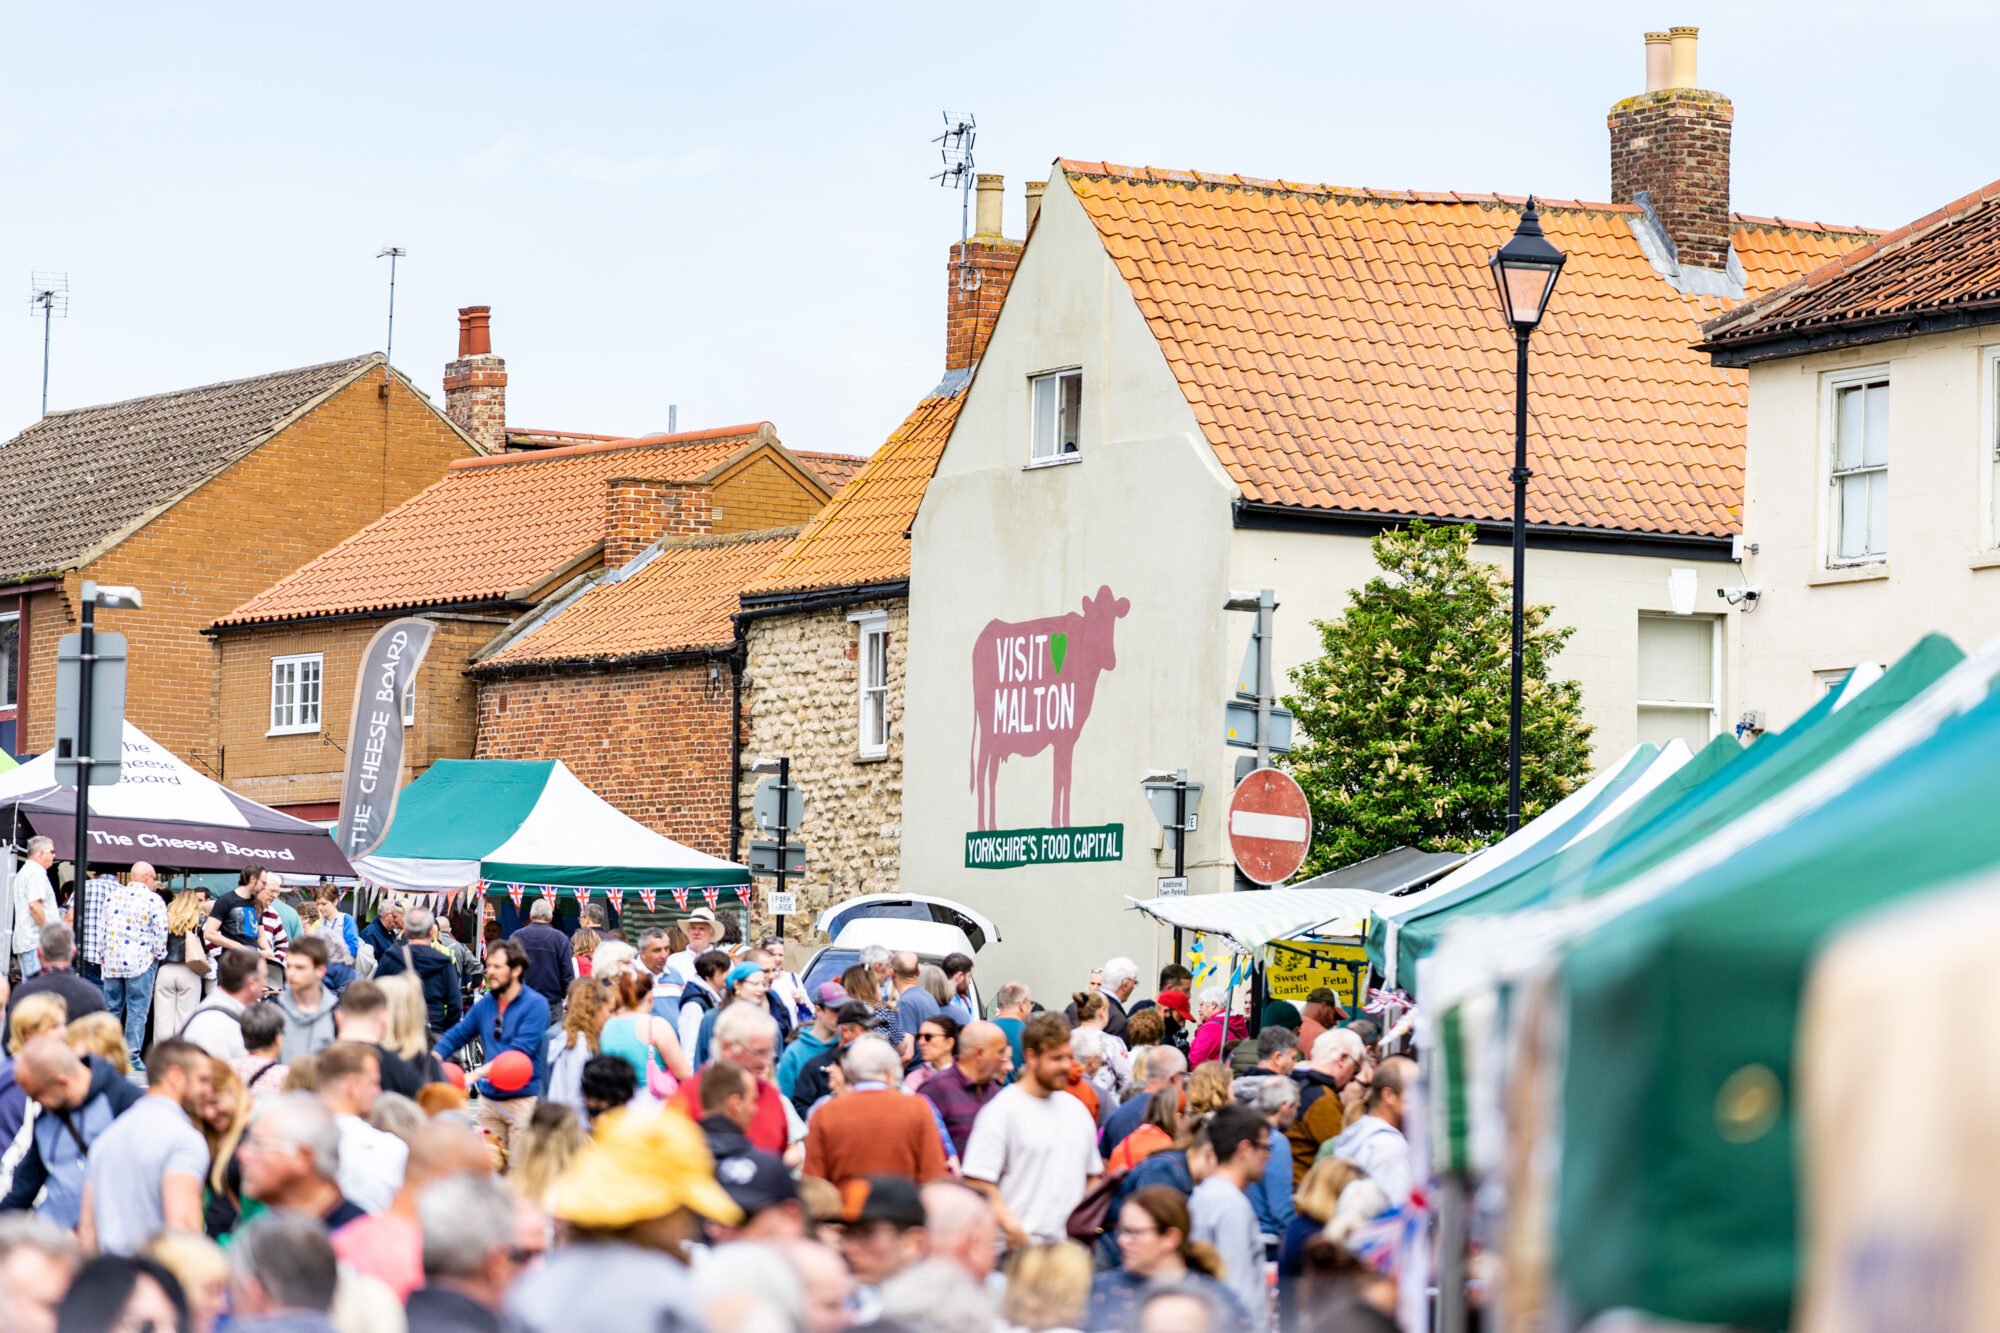 Image name Crowds Market Place East. Malton Food Festival 3 June 2022. Photo Credit milnerCreative on behalf of Visit Malton the 8 image from the post Events in Yorkshire.com.